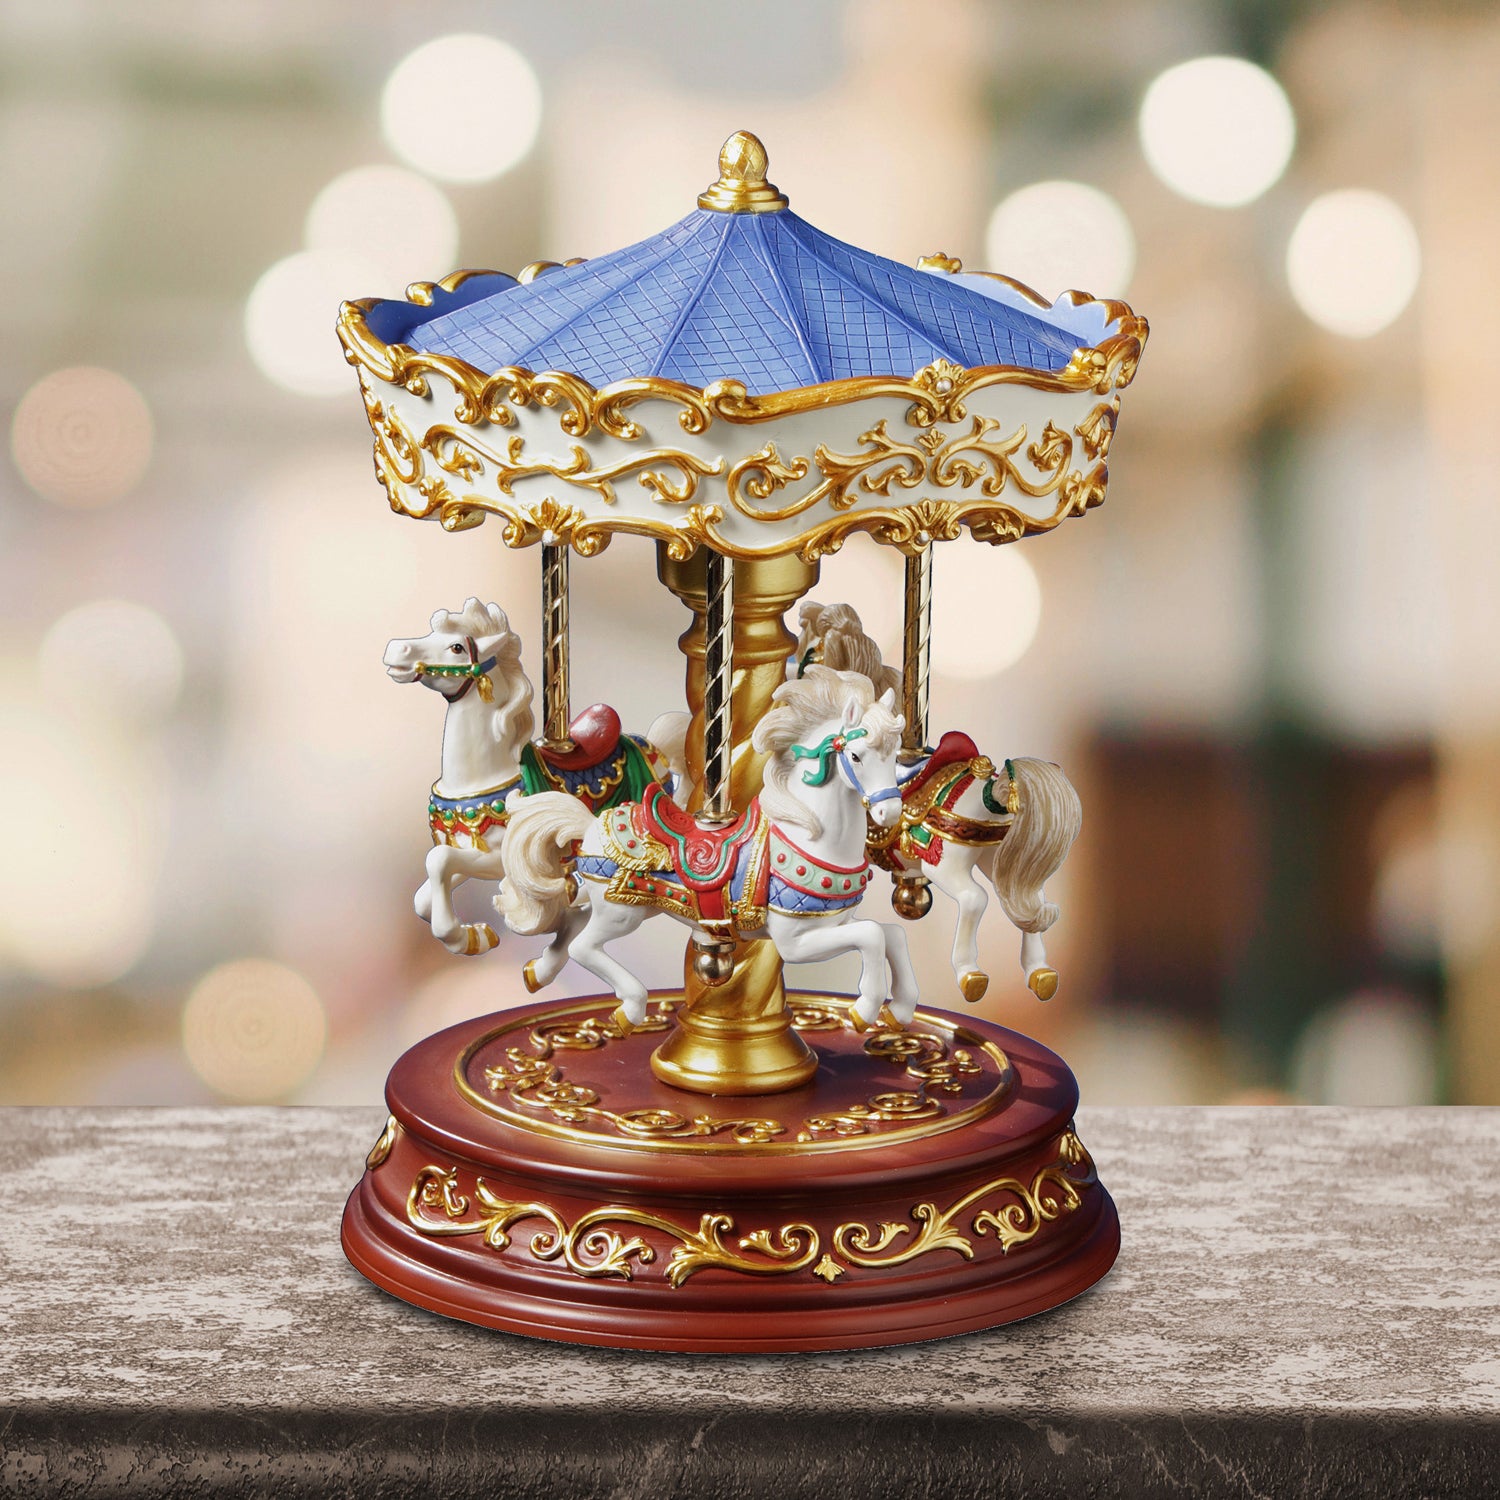 Christmas Carousel Music Box, Including Wooden Horse Music Box and